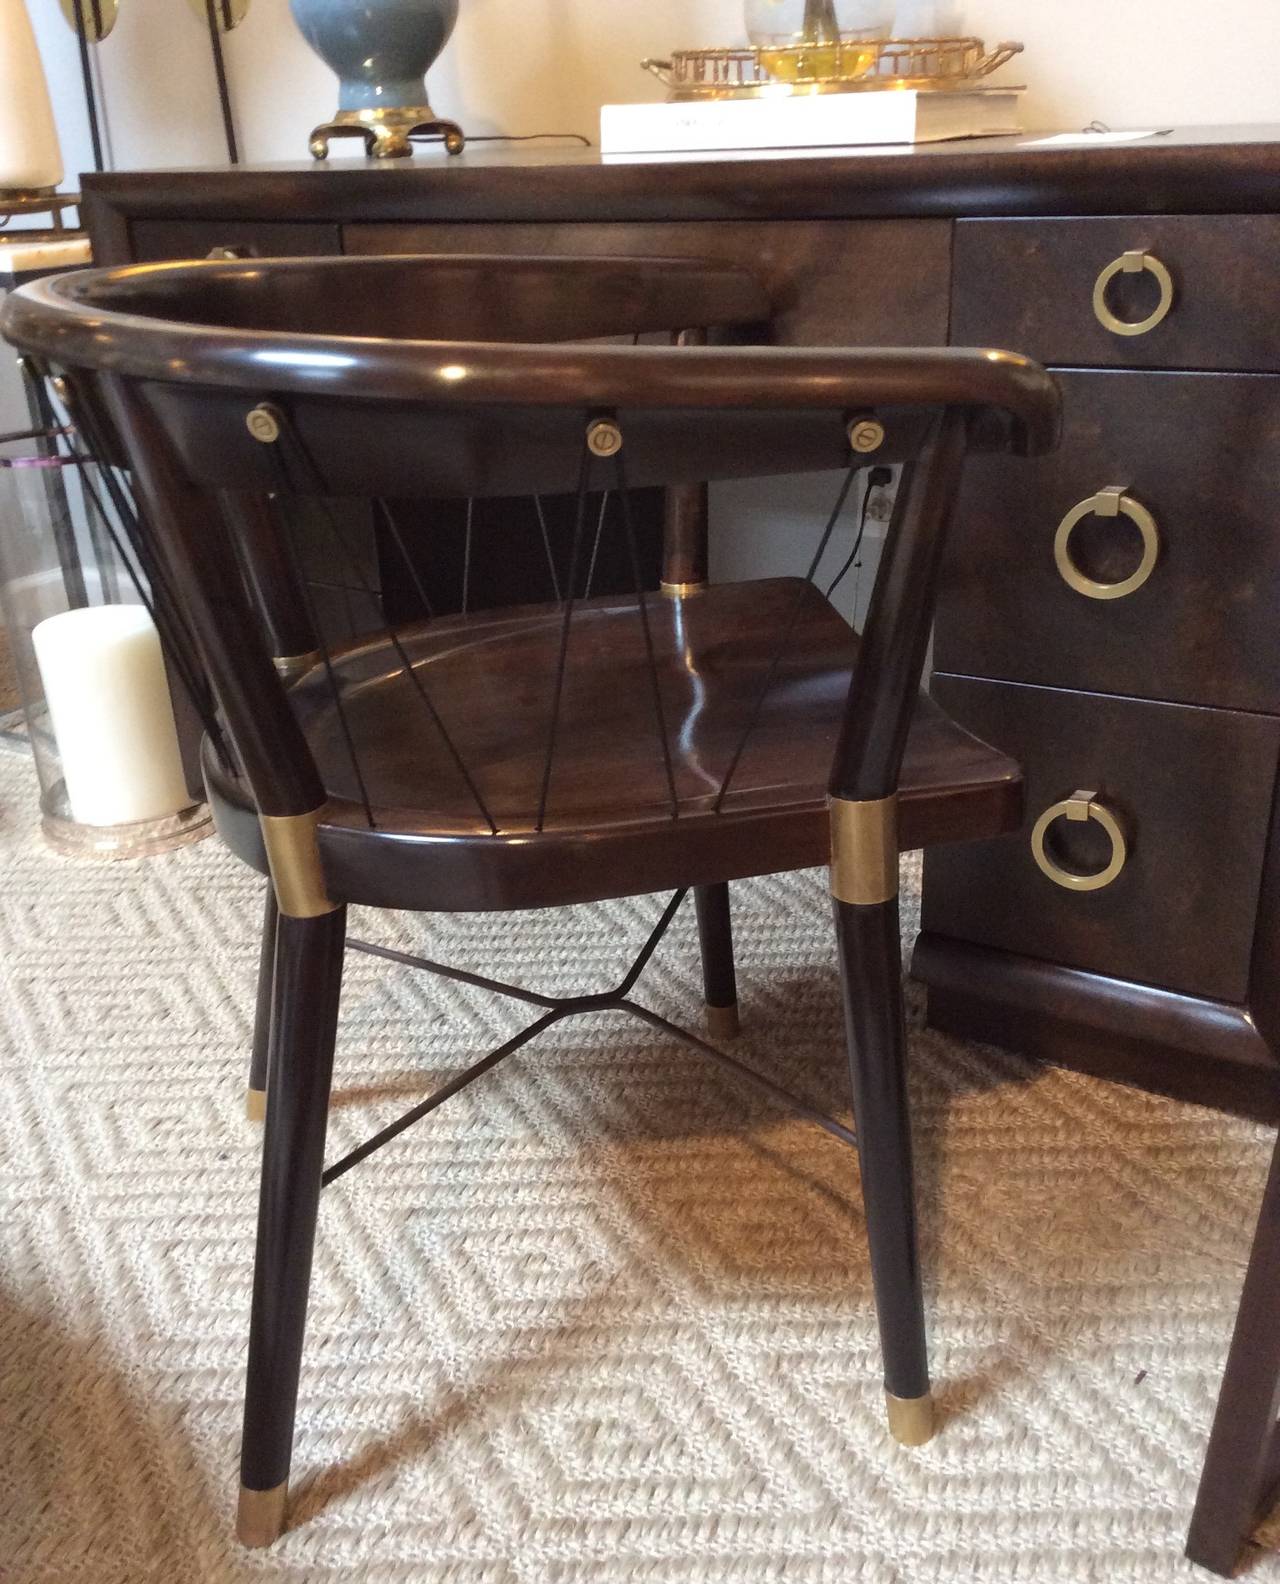 20th Century Edward Wormley Chair with Brass Fittings and Cord Back